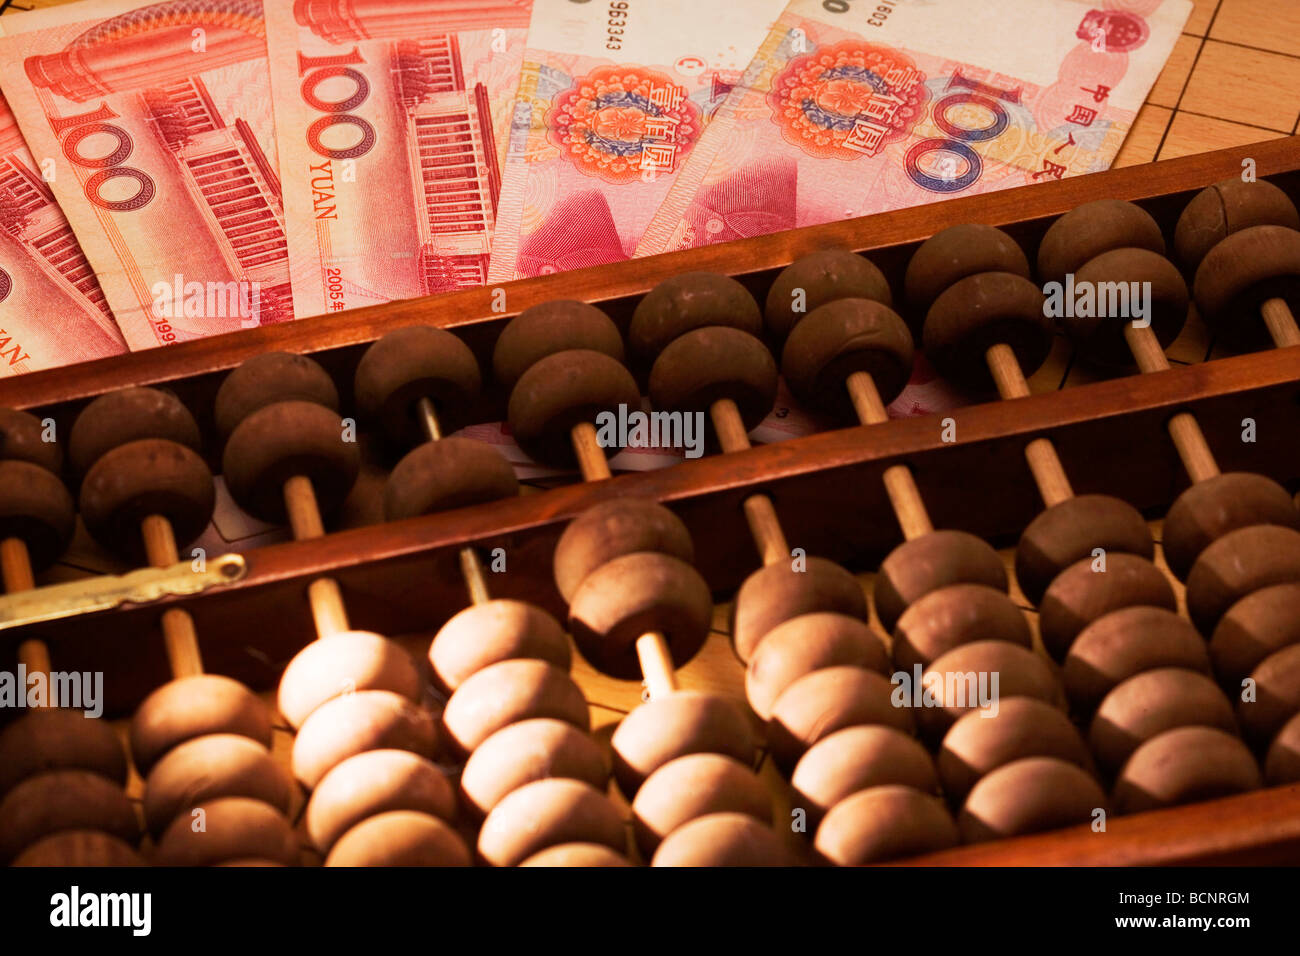 Chinese traditional calculator abacus with one hundred Chinese RMB bills Stock Photo